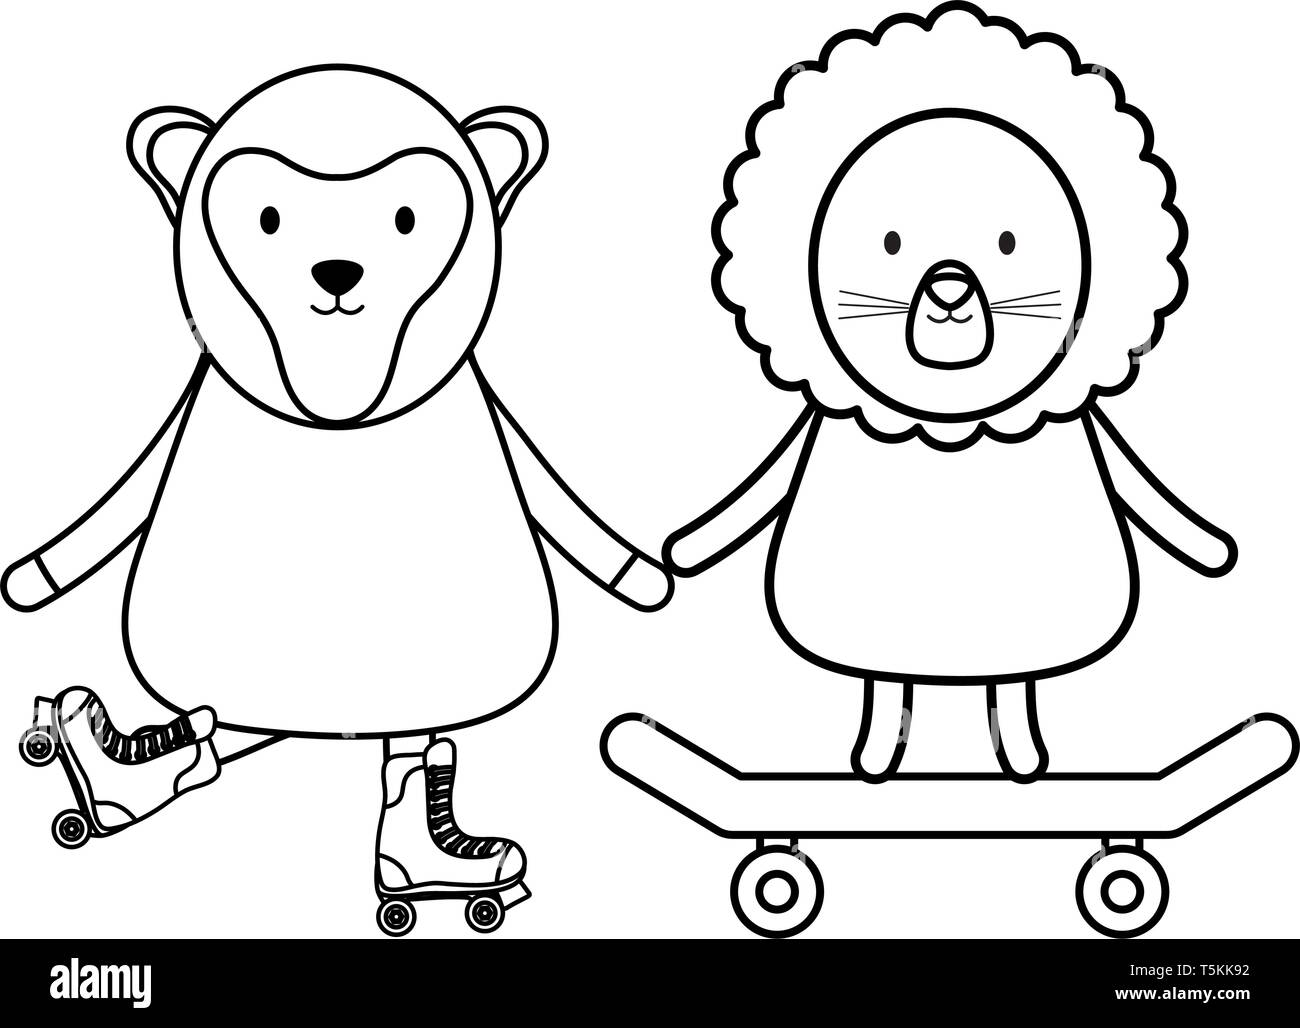 cute skater lion with monkey in skates childish characters vector illustration design Stock Vector